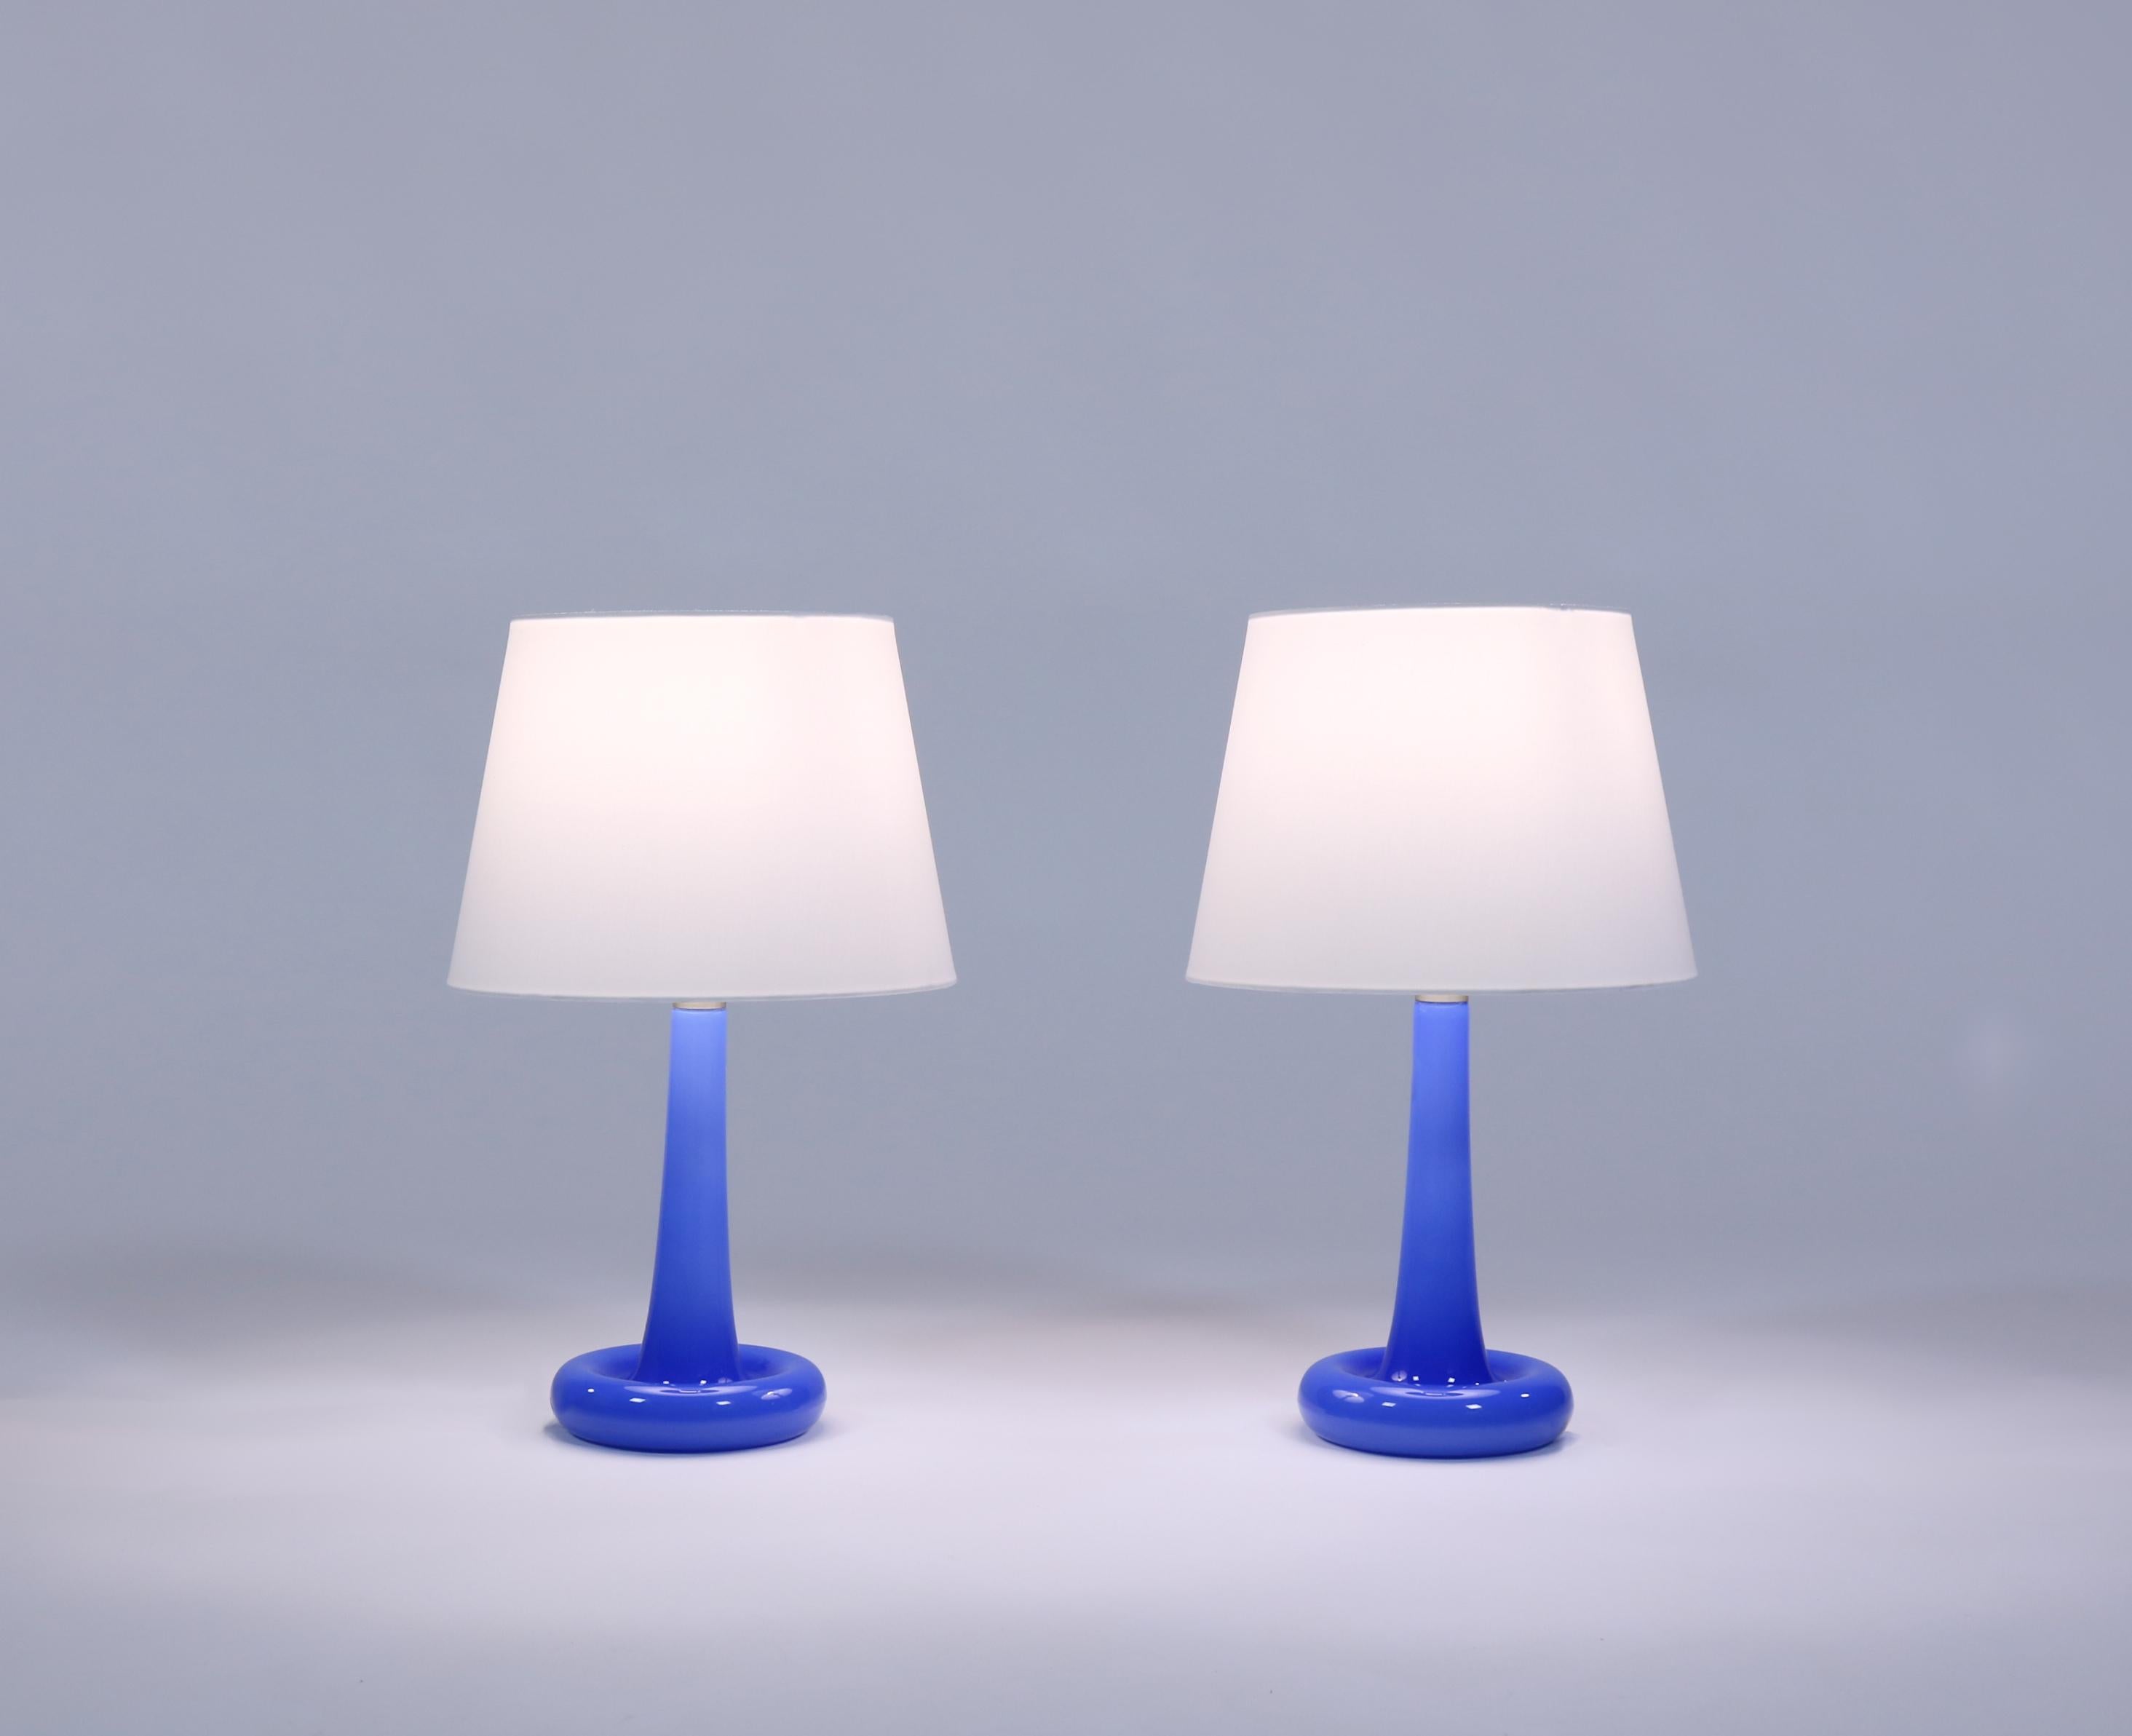 Beautiful blue table lamps made in 1975 at Holmegaard Glassworks, Copenhagen. The design is by renown glass artist Michael Bang and each lamp was mouth blown. The shape resembles a flower and the model was called 